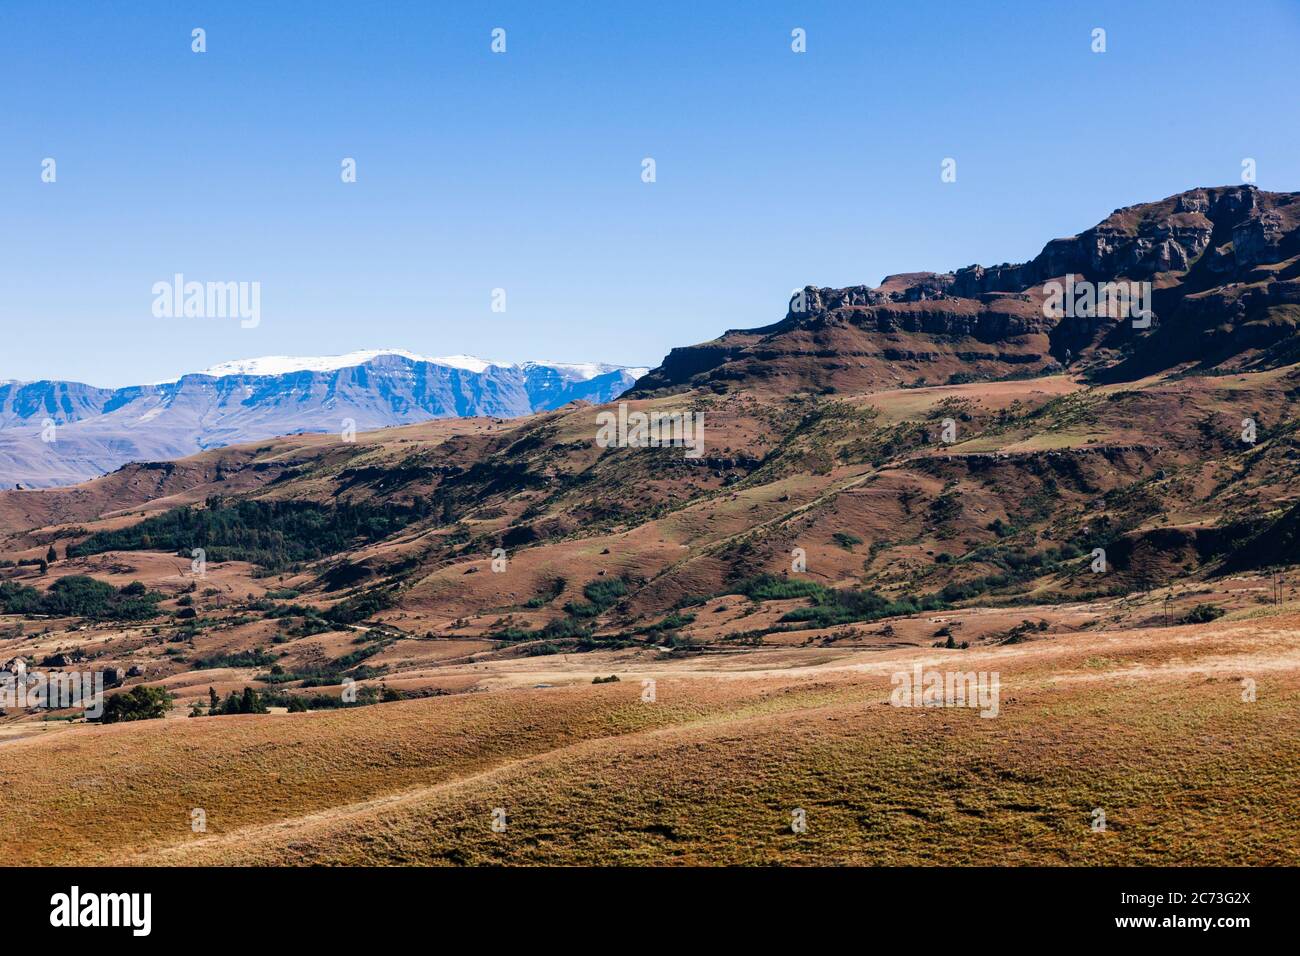 Drakensberg, view of mountains and Mkhomazi Wilderness area, from Lower Lotheni Road, KwaZulu-Natal, South Africa, Africa Stock Photo